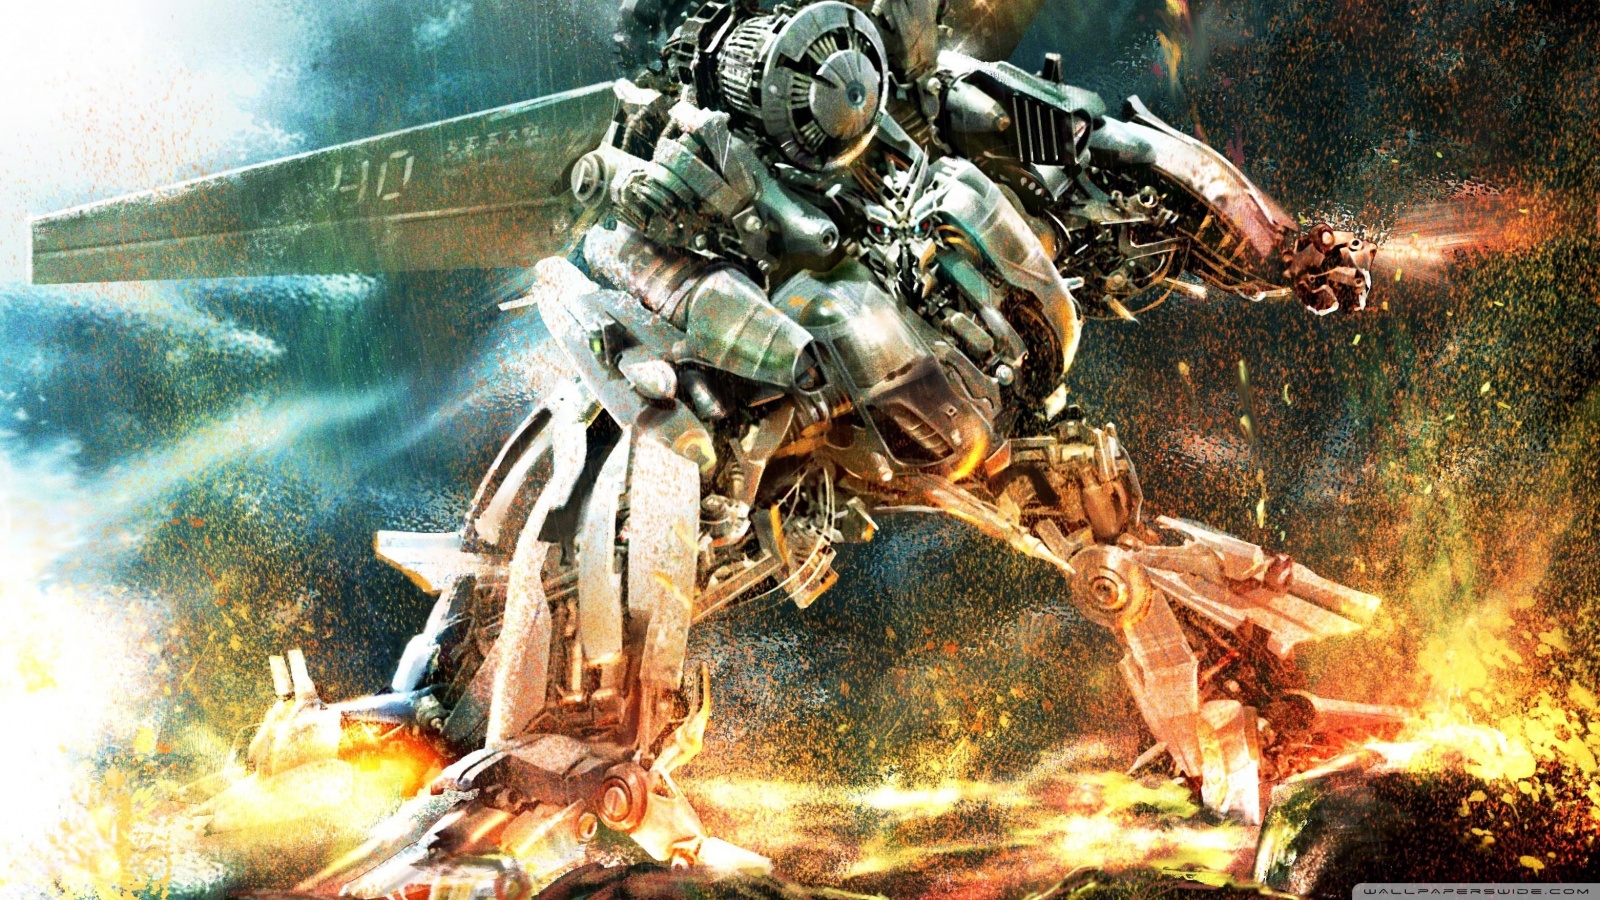 war robots wallpaper,action adventure game,pc game,games,strategy video game,fictional character